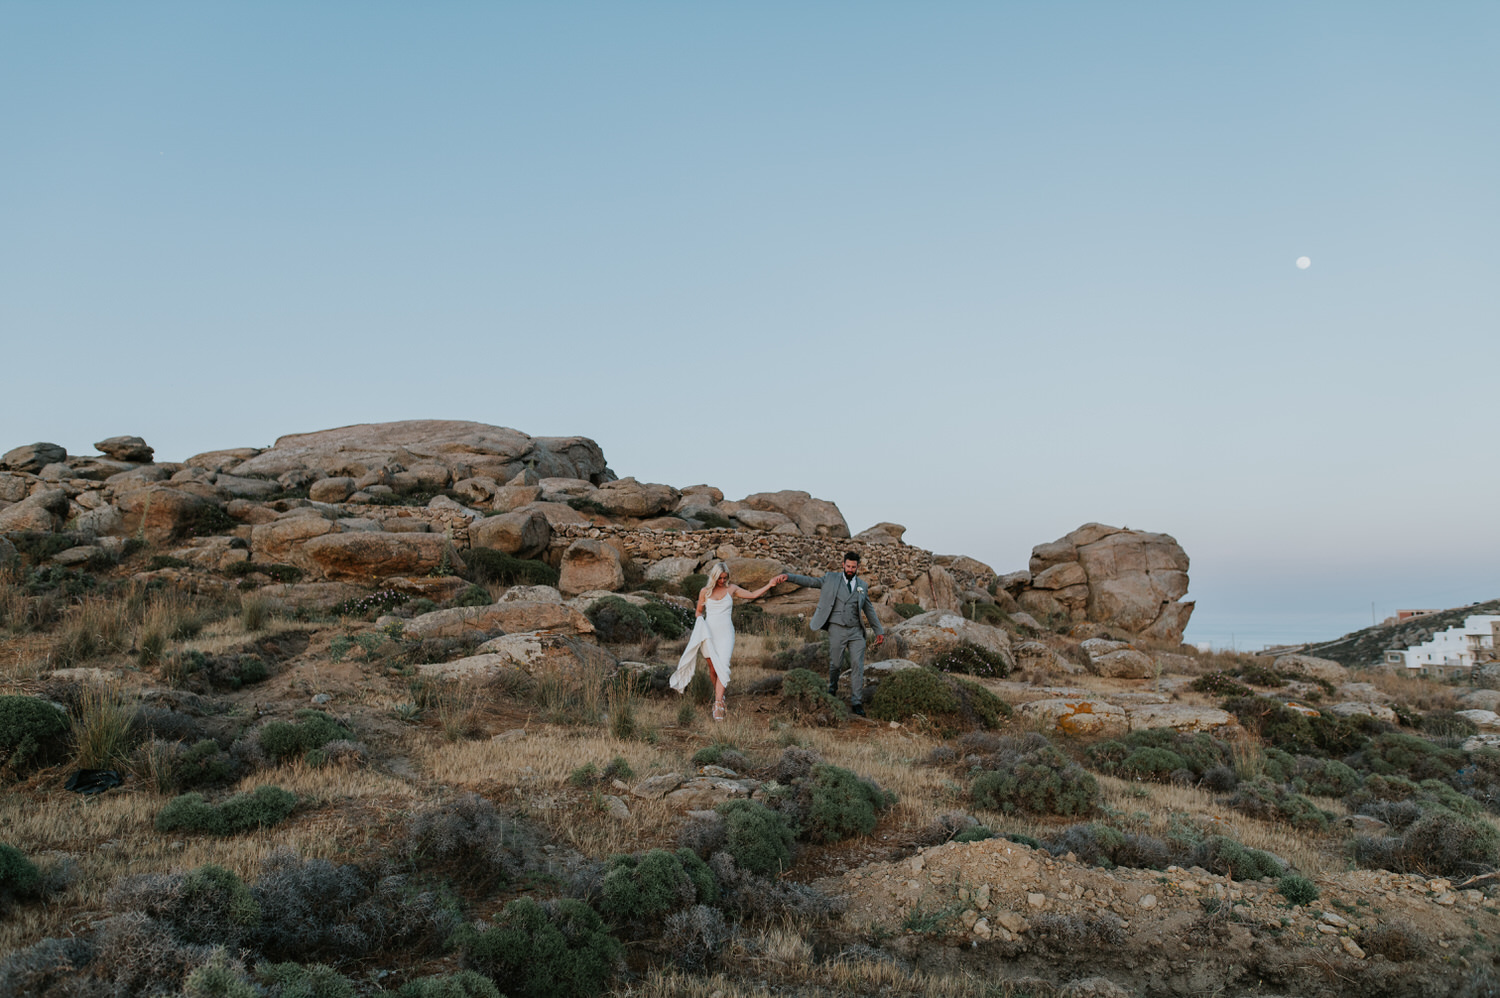 Mykonos wedding photographer: bride and groom in Mykonian landscape surrounded by rocks with the moon in the background.